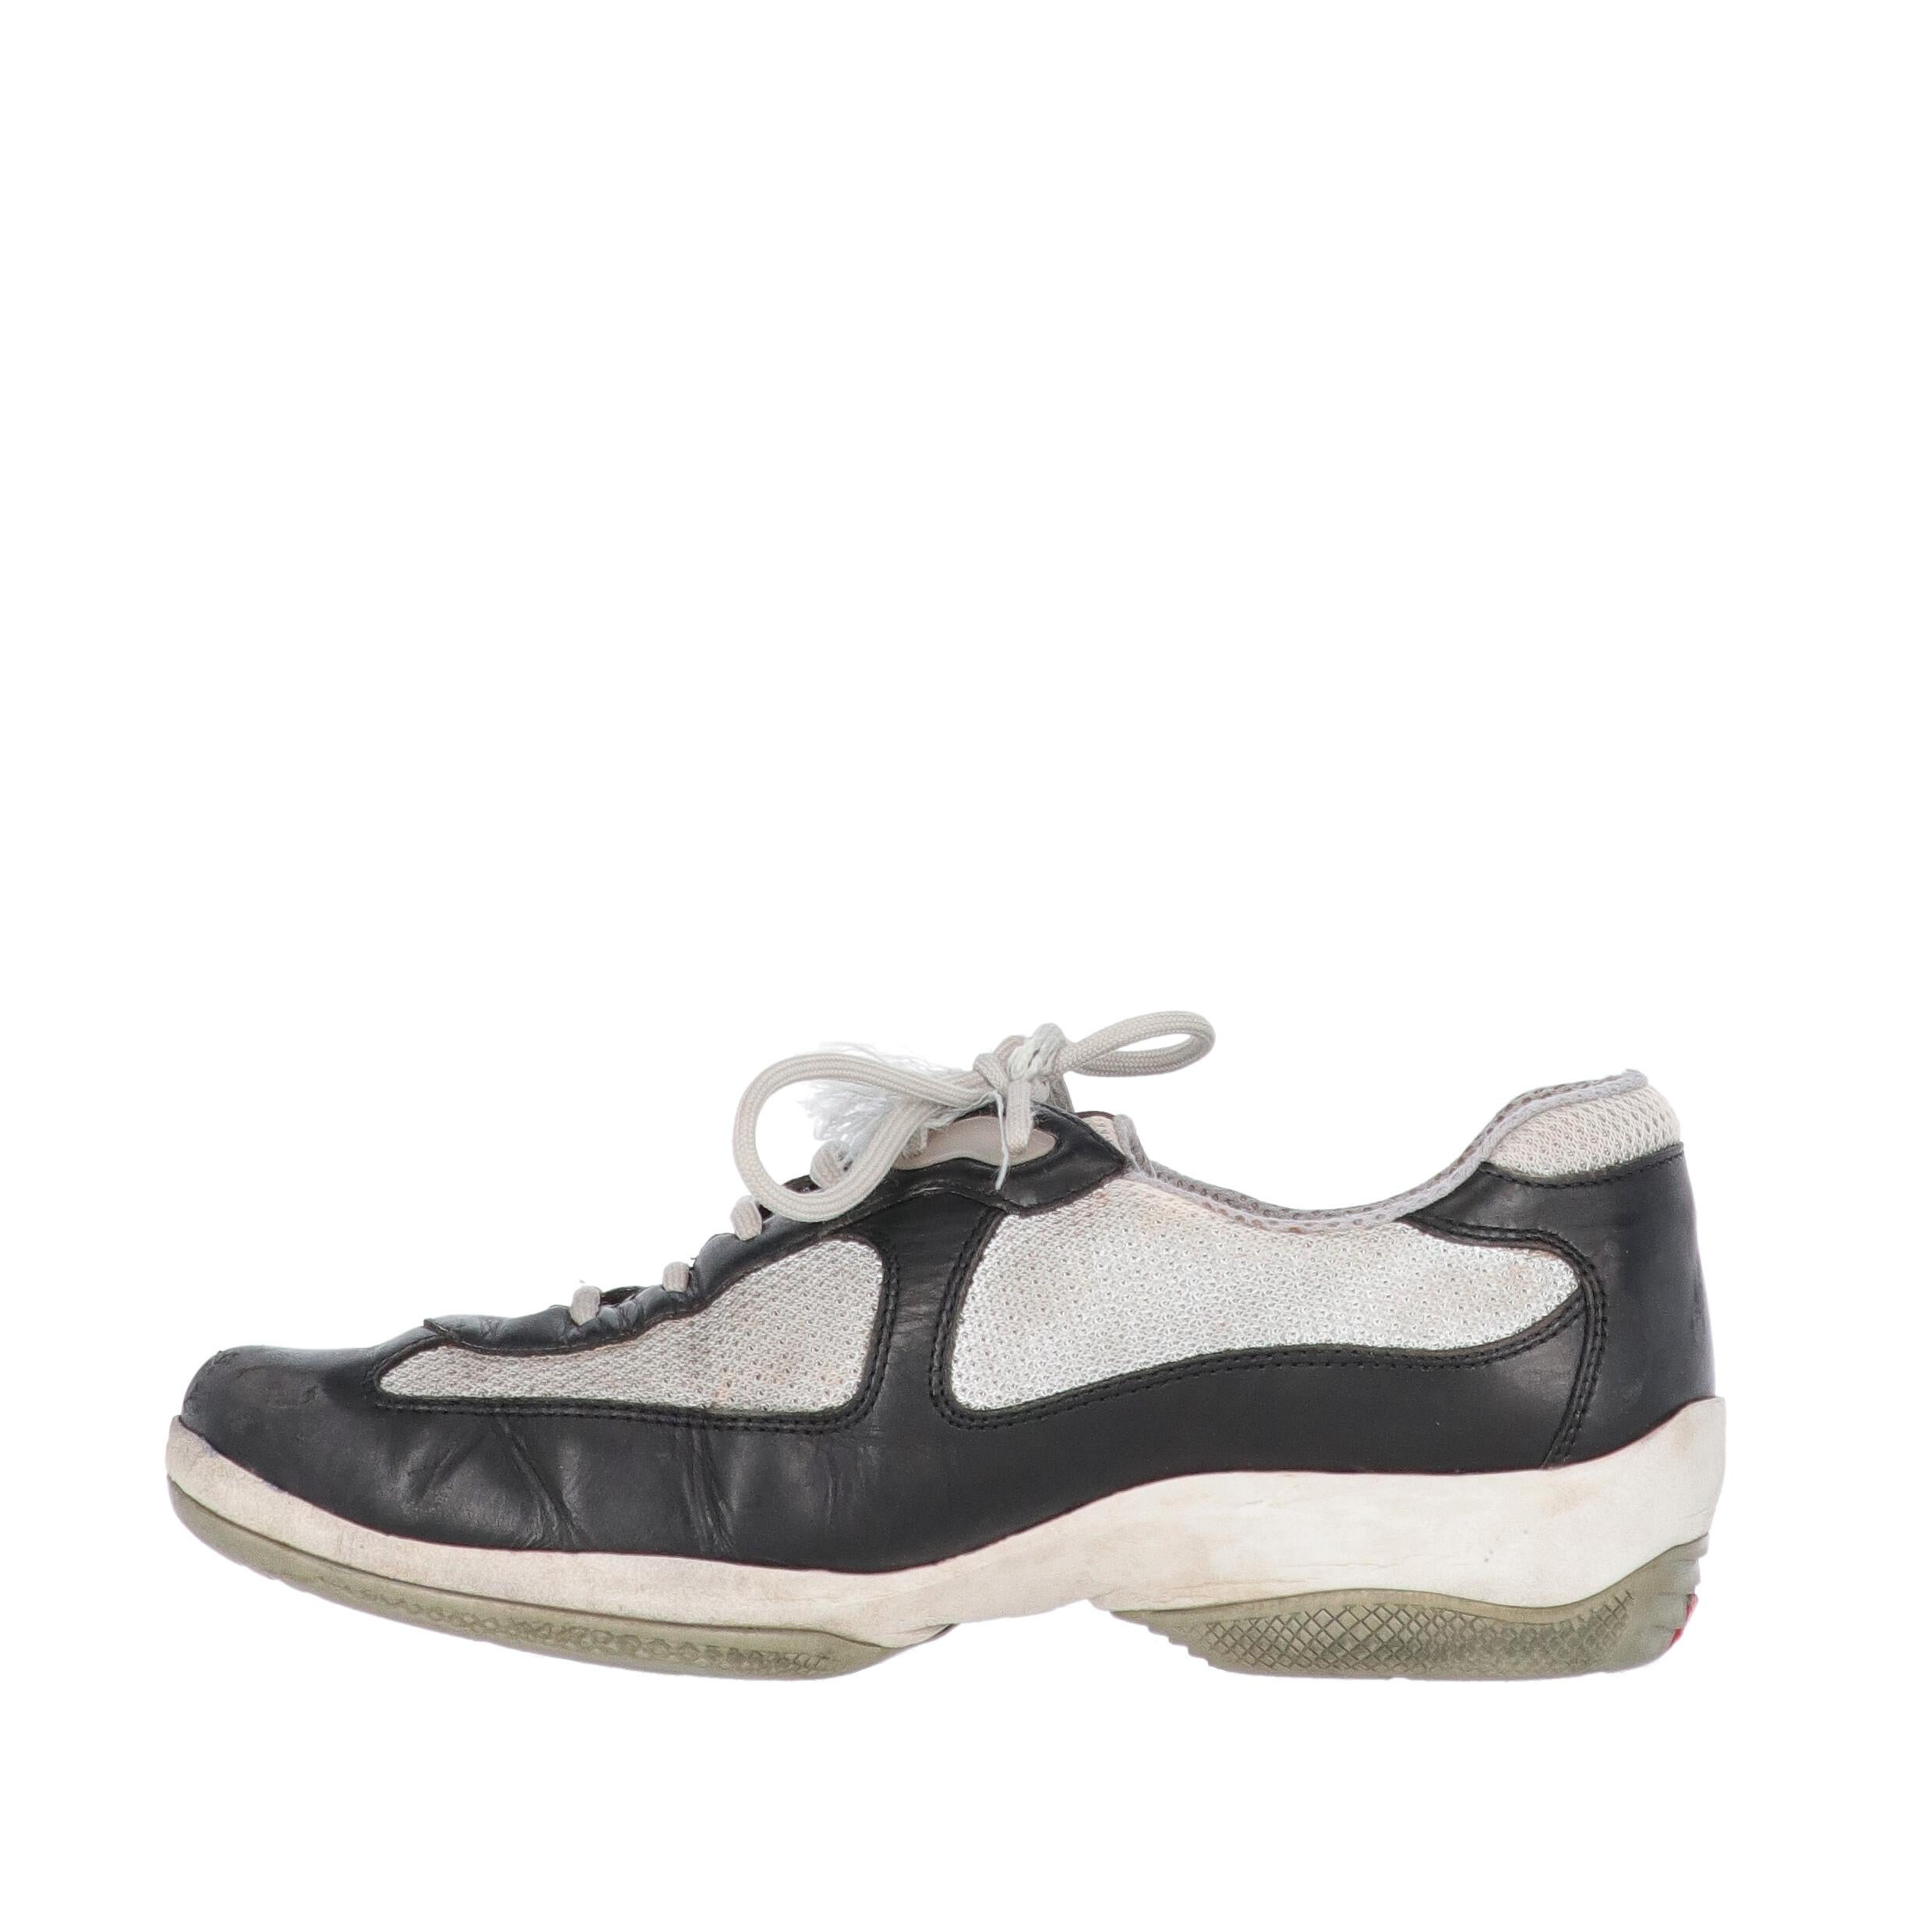 Prada grey technical fabric and dark blue leather lace-up shoes, round toe and rubber sole with Prada Linea Rossa logo. 
The shoes show light signs of wear on the leather, the sole and the inside, and a frayed string, as shown in the pictures.